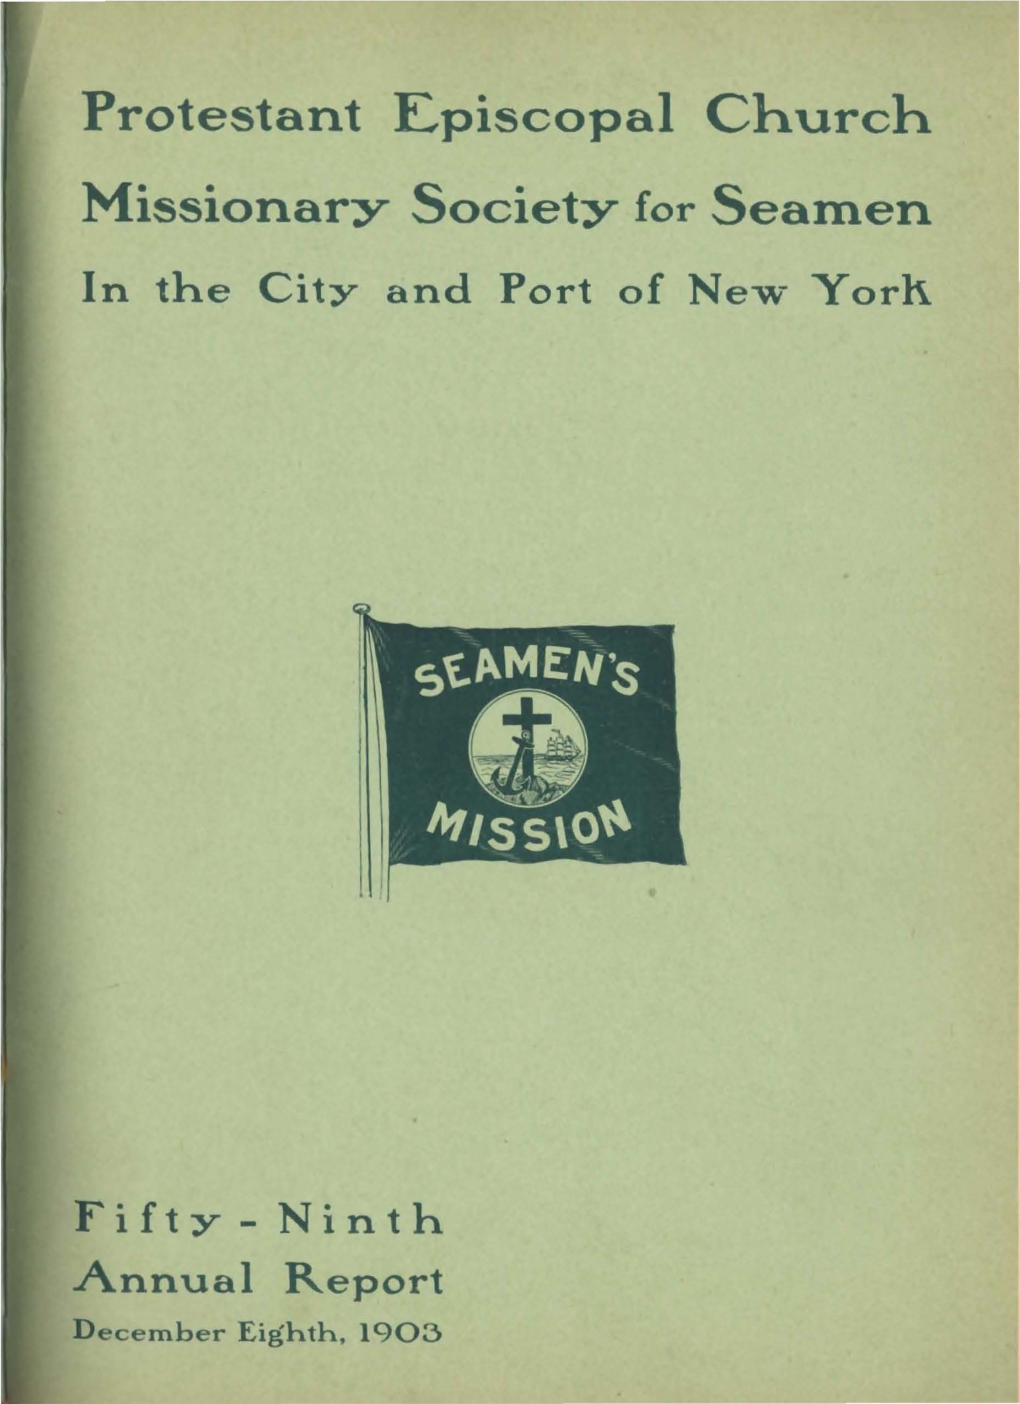 Protestant Episcopal Church Missionary Society for Seamen